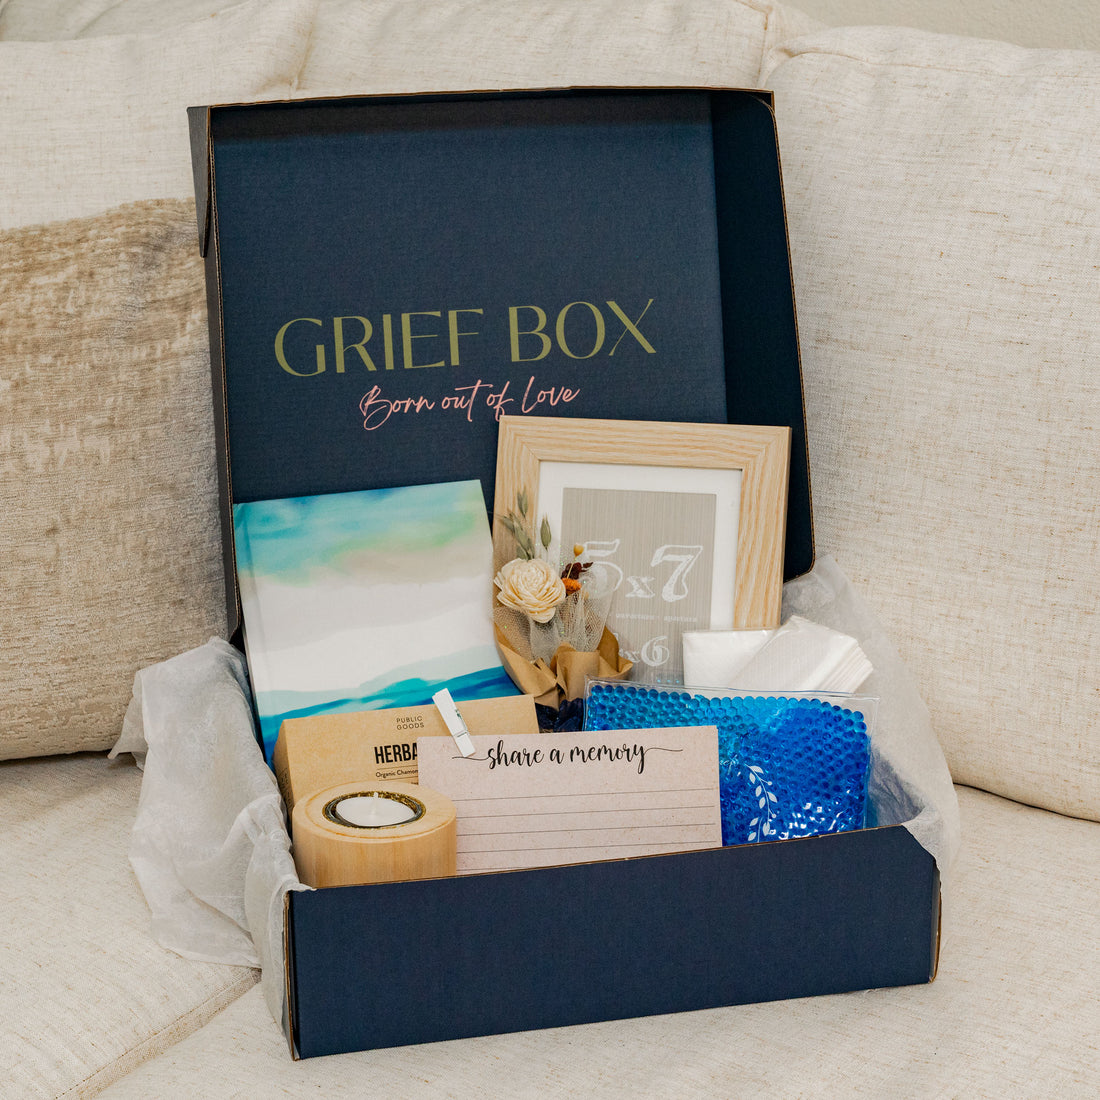 Sending Comfort and Support: Introducing Grief Care Packages